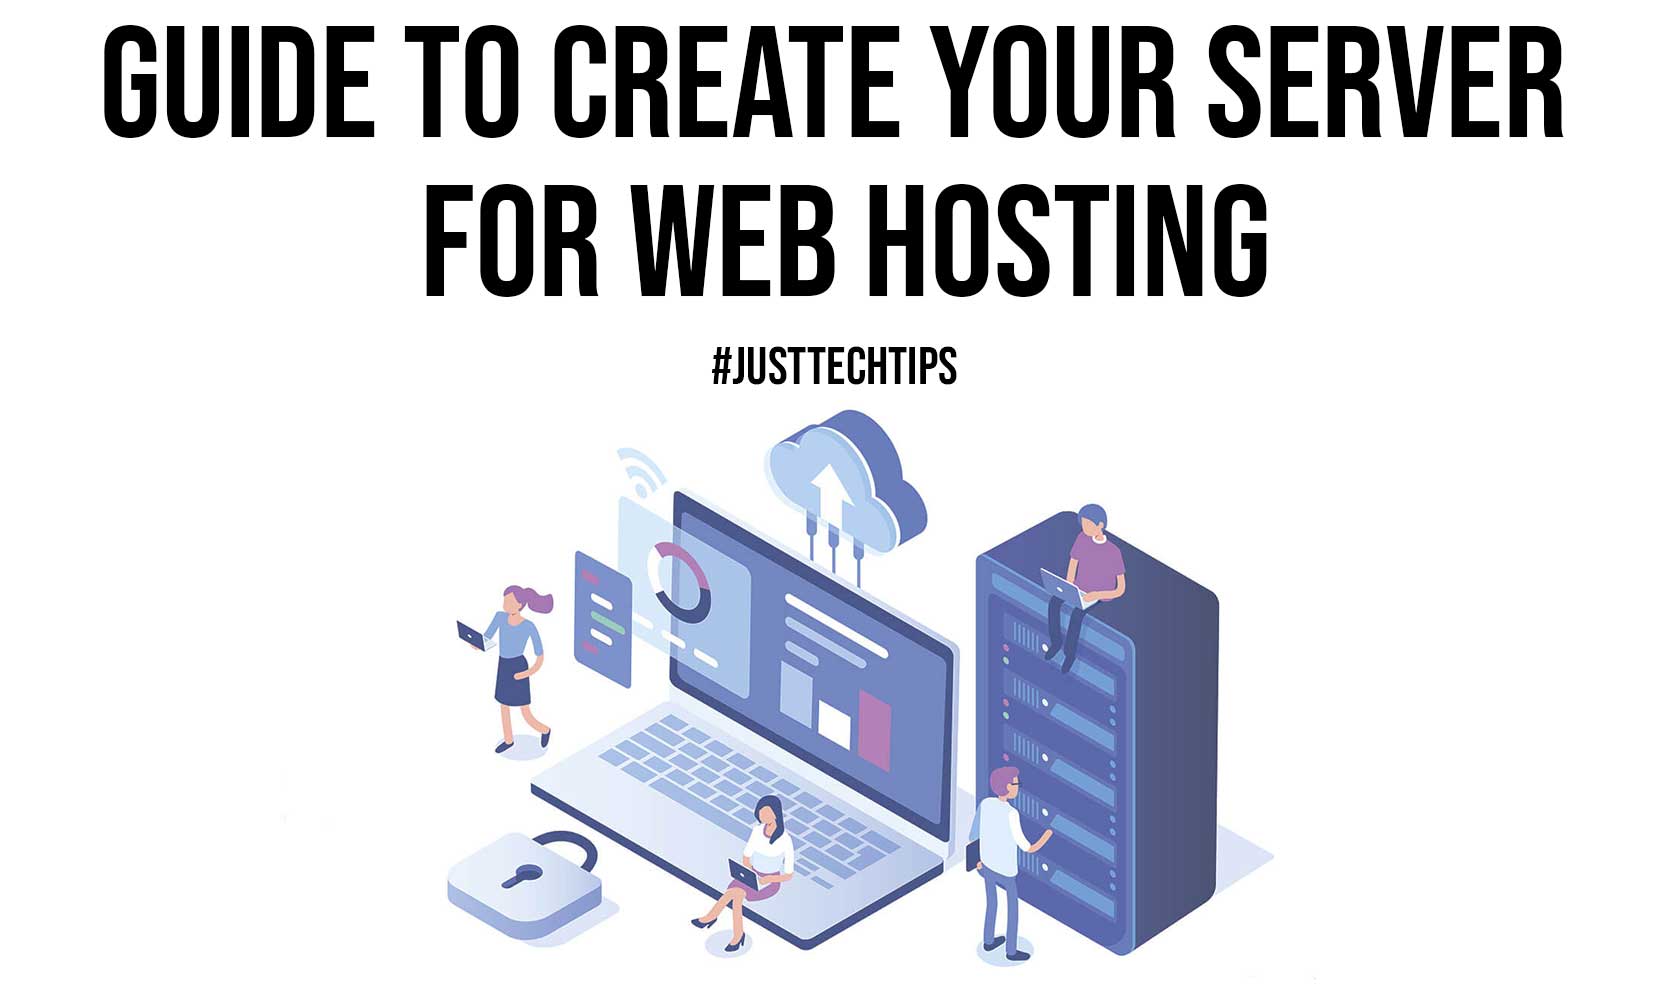 Guide To Create Your Server for Web Hosting